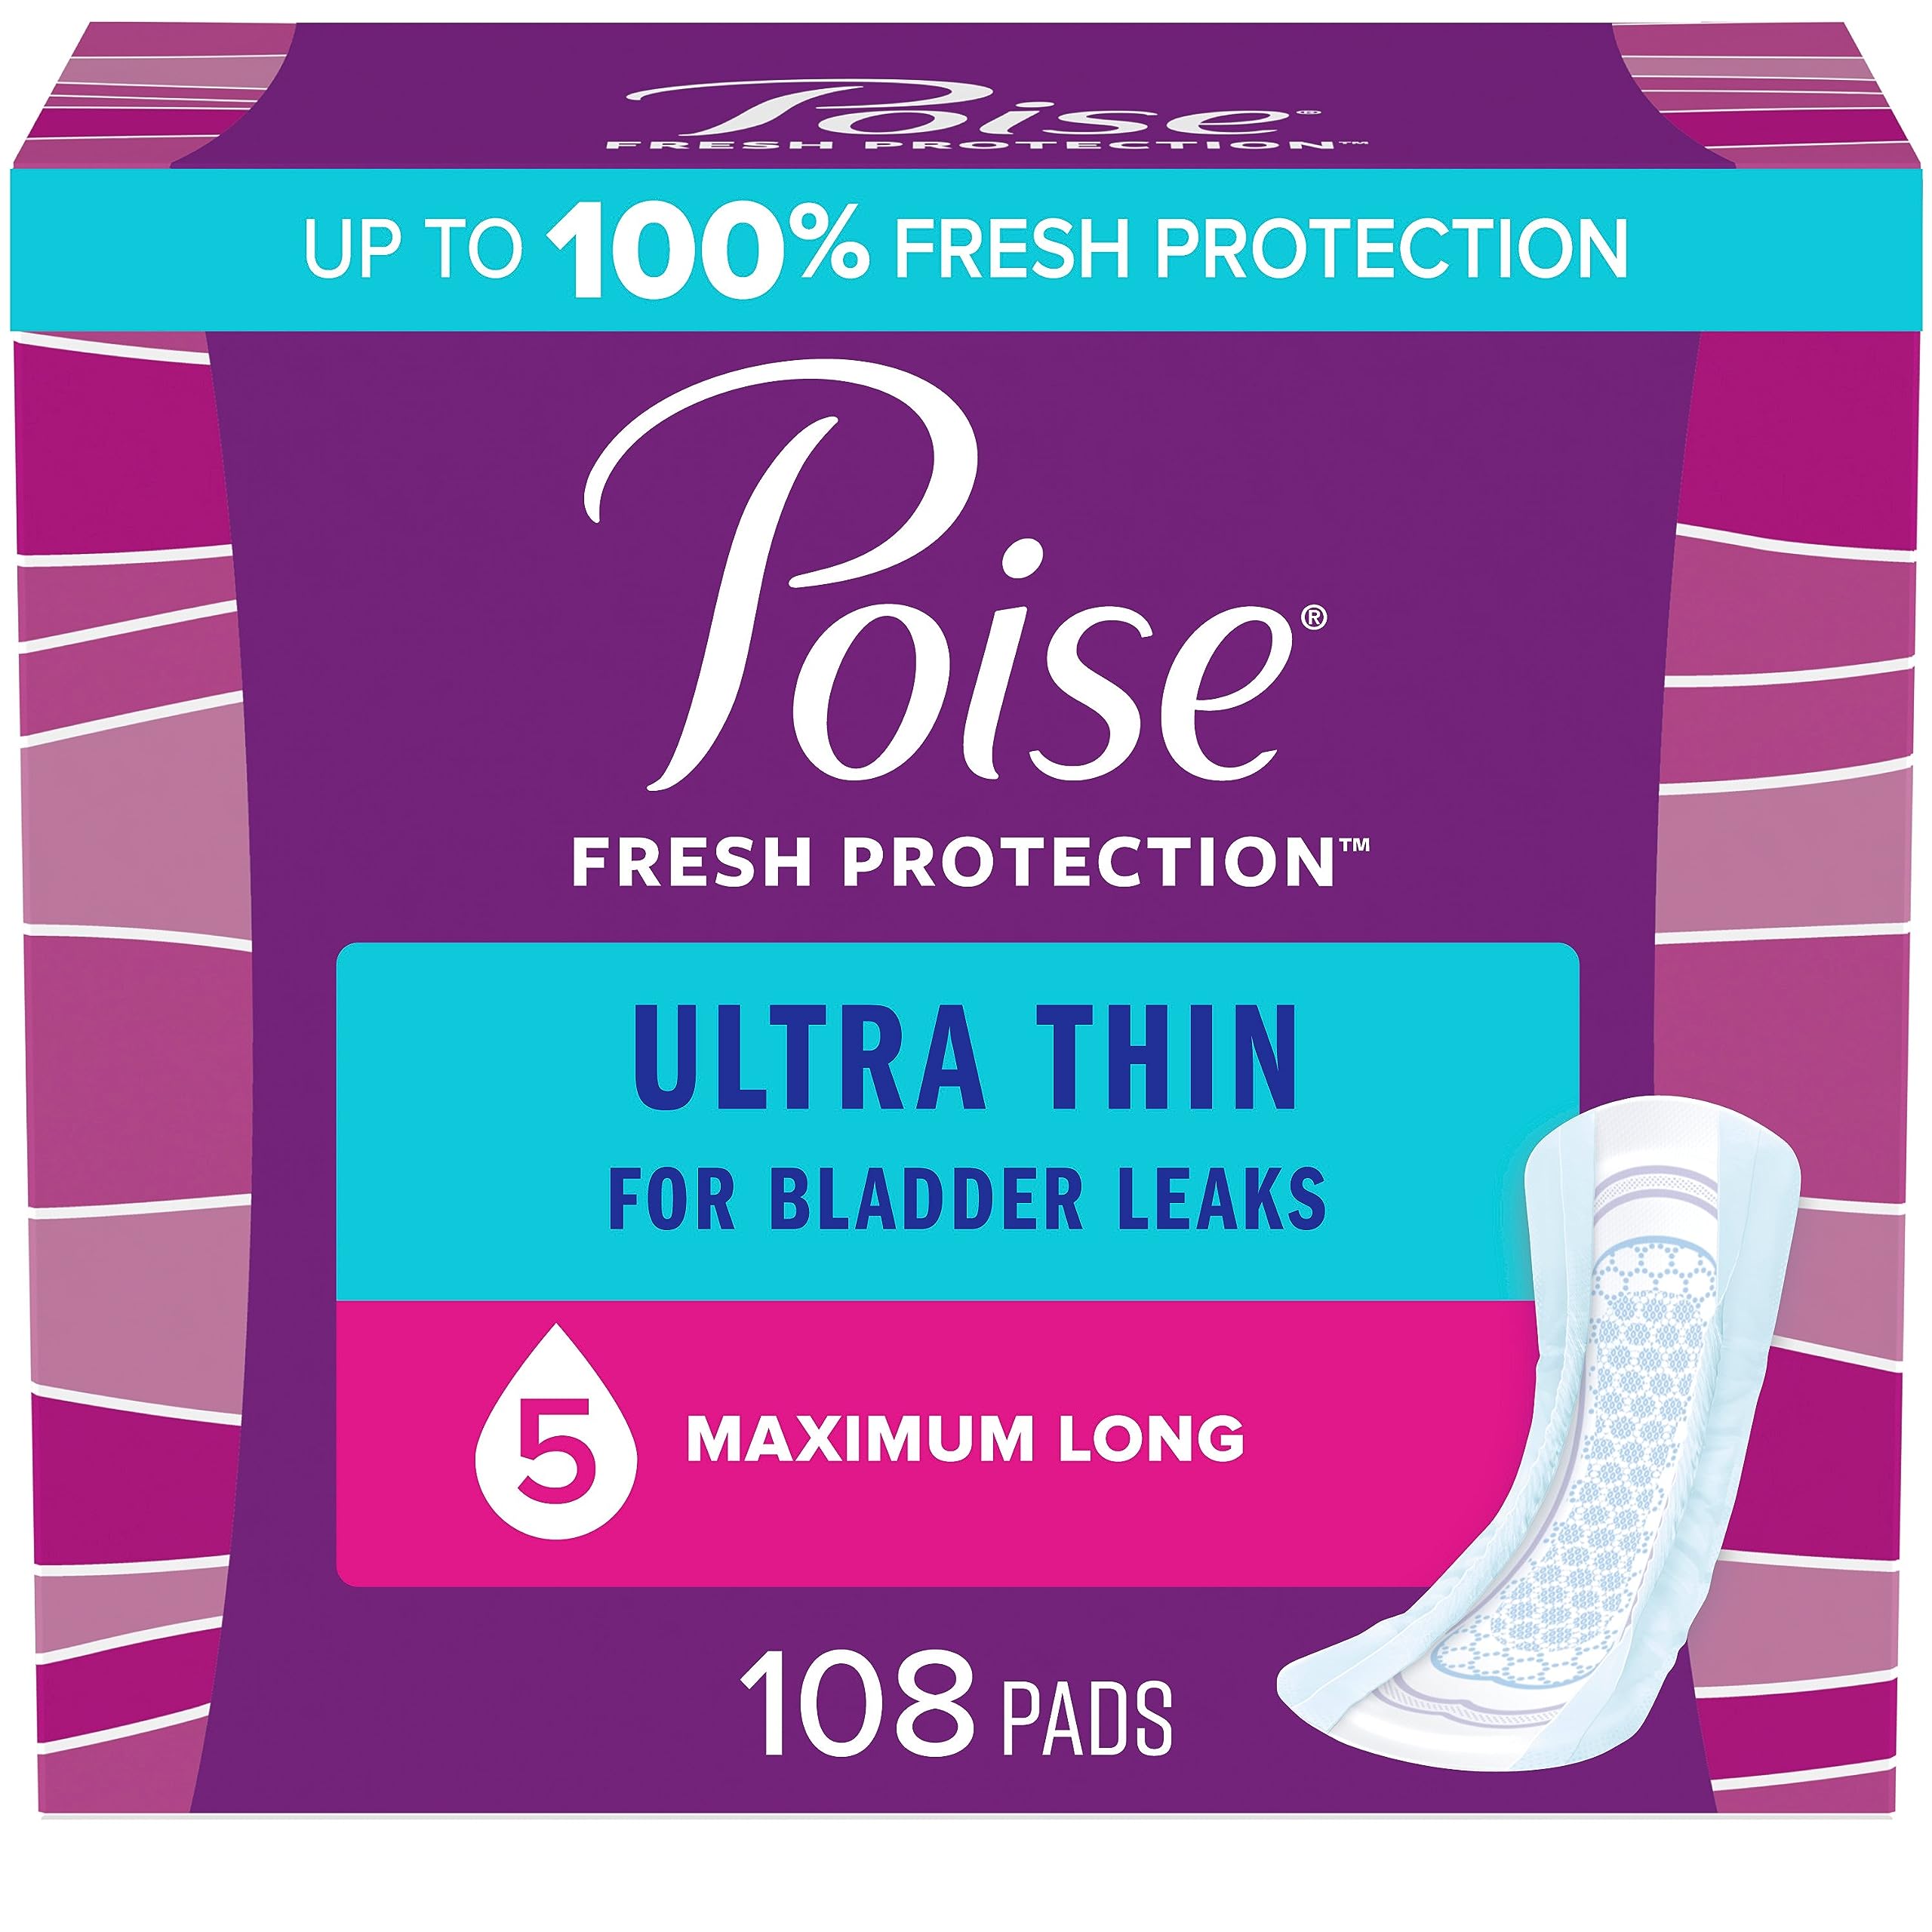 Poise Ultra Thin Incontinence Pads & Postpartum Incontinence Pads, 5 Drop Maximum Absorbency, Long Length, 36 Count (Pack of 3), Packaging May Vary